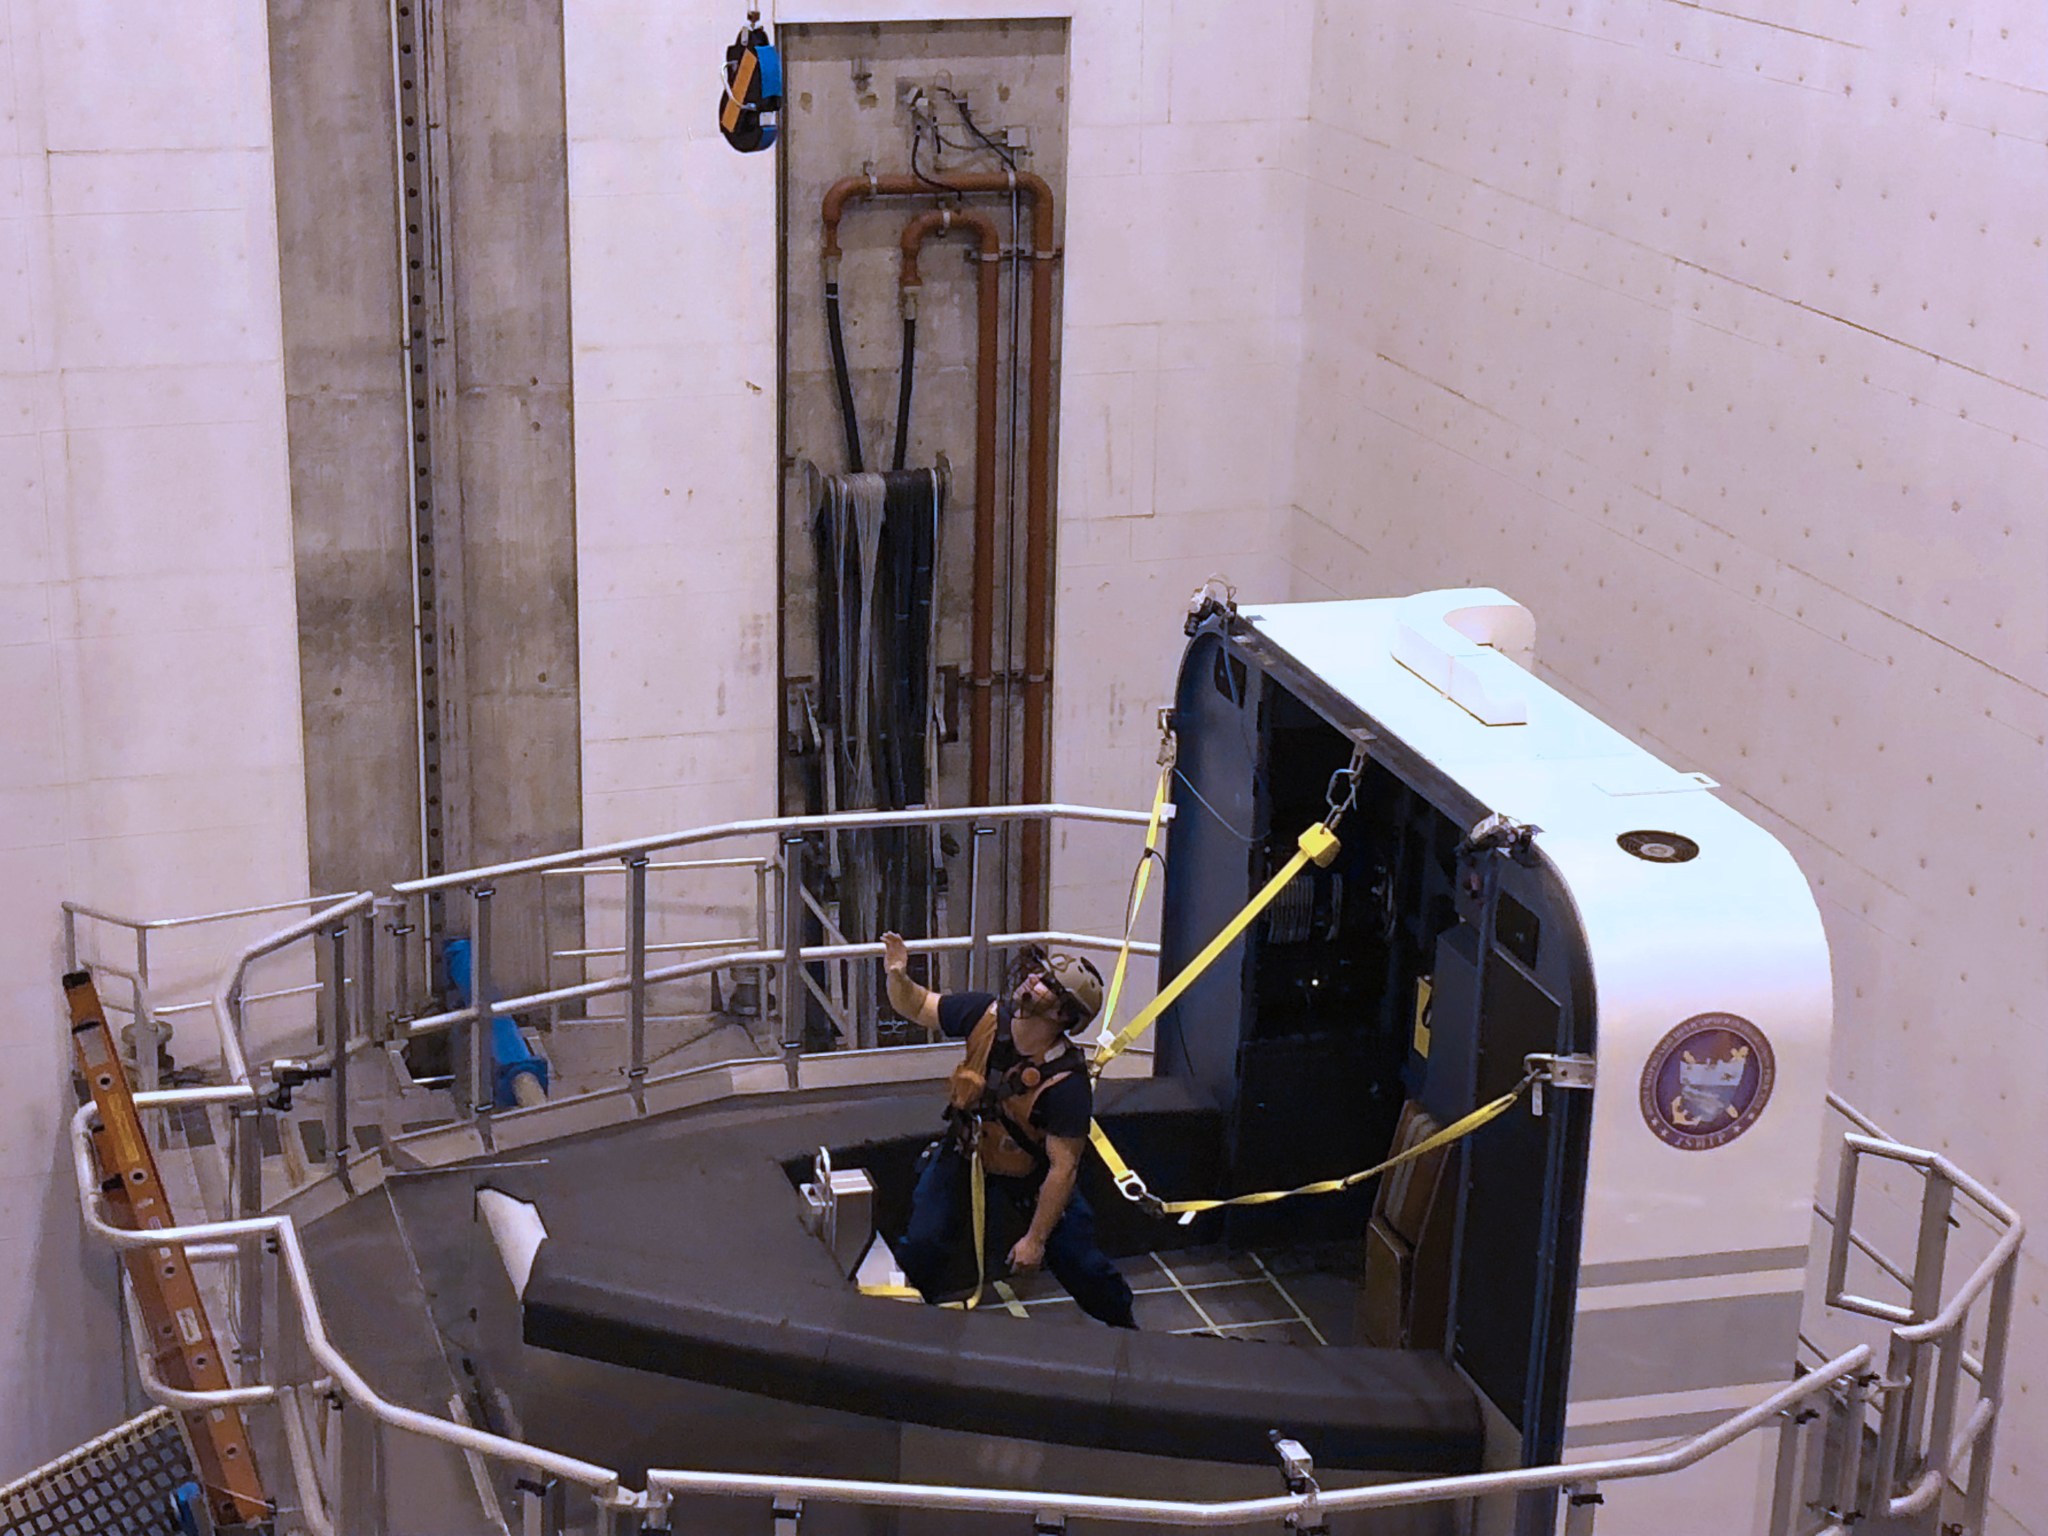 A human participant is shown attached to a simulation cab, resembling a small boat, on the VMS. The participant is looking and reaching up.